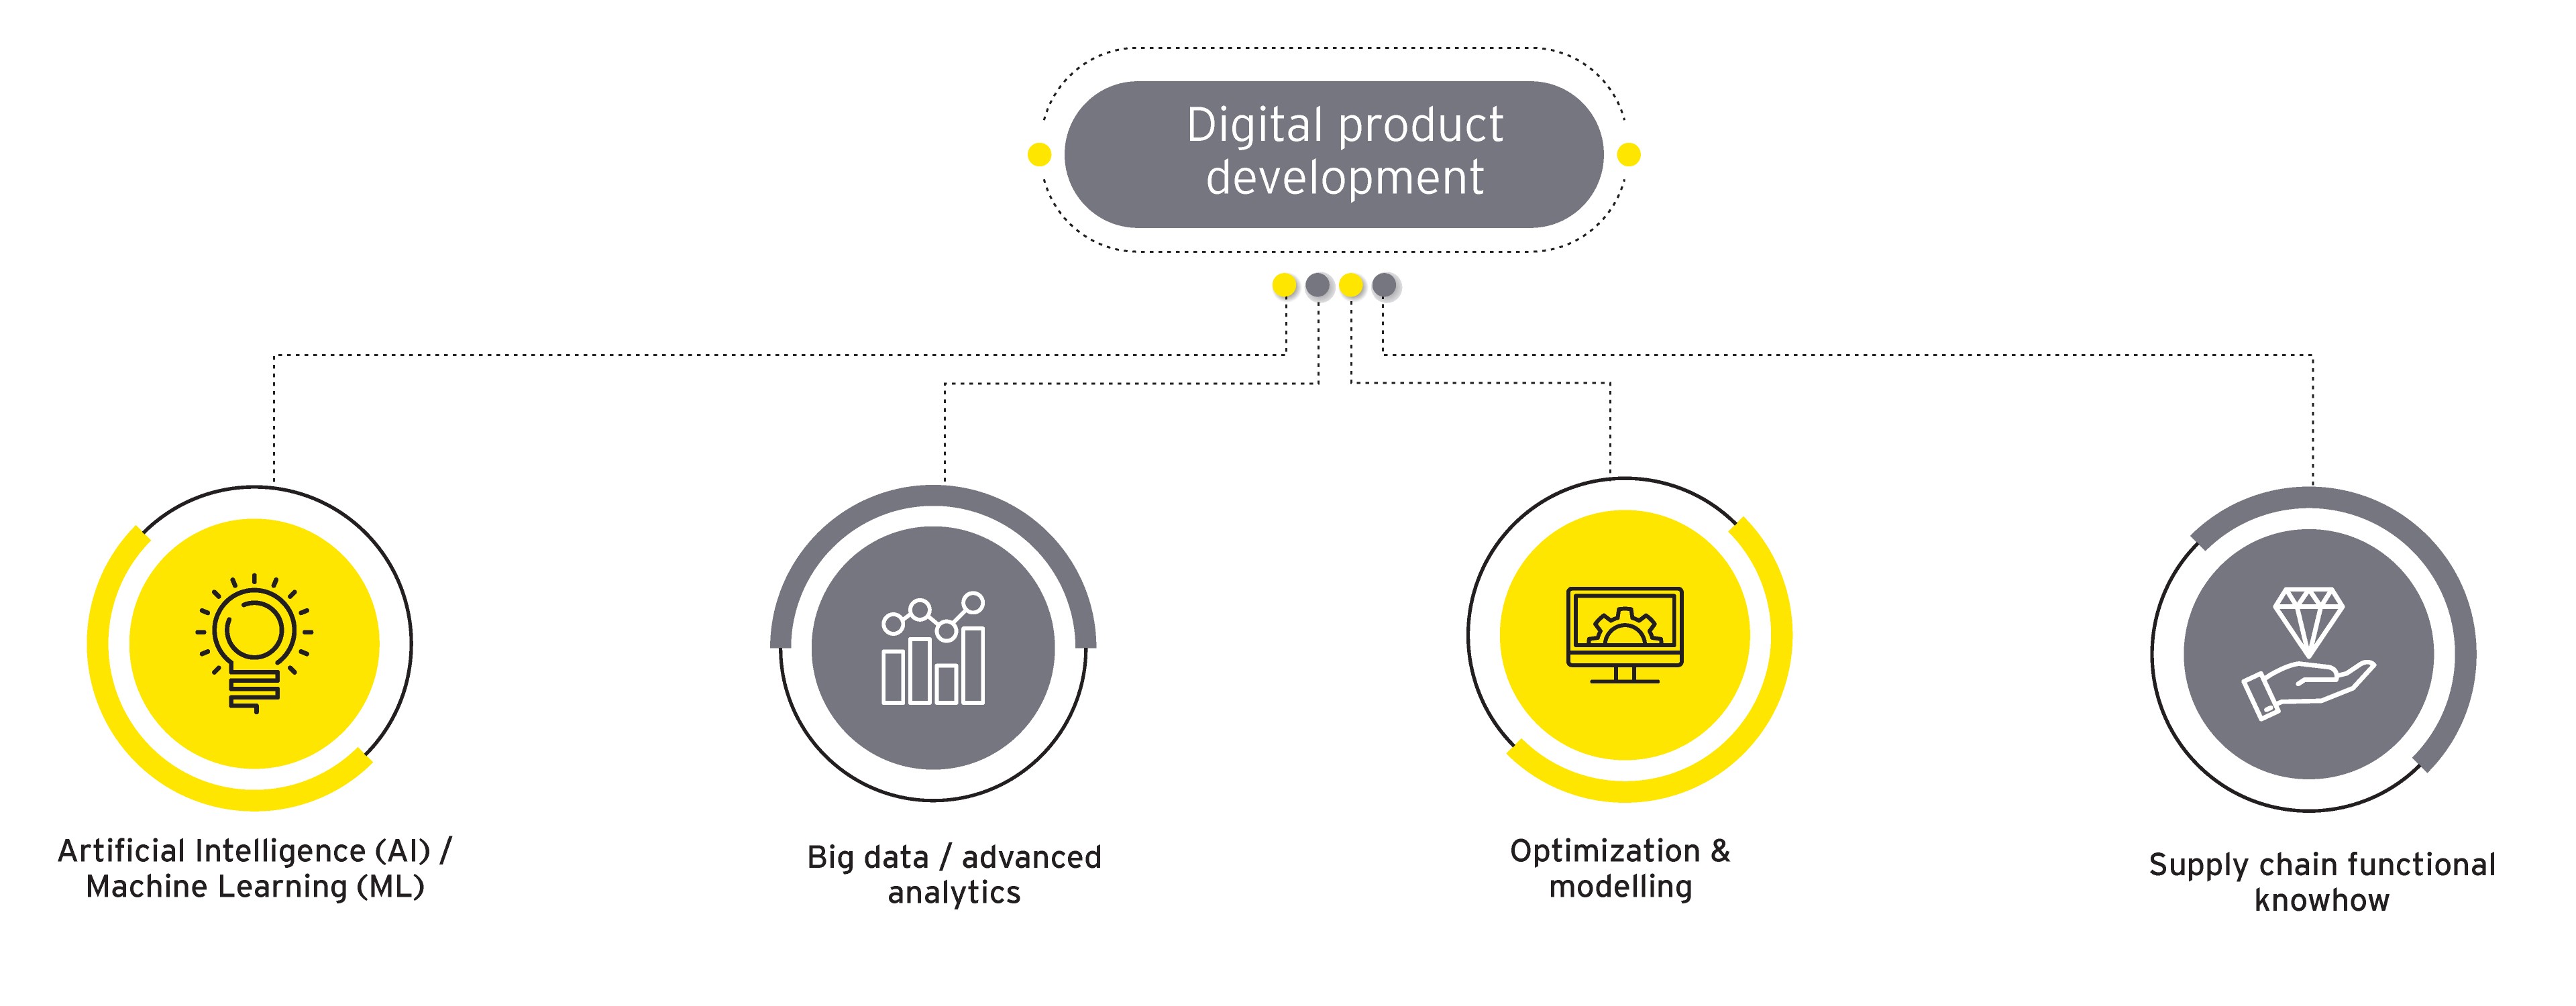 Digital product development in supply chain planning solutions